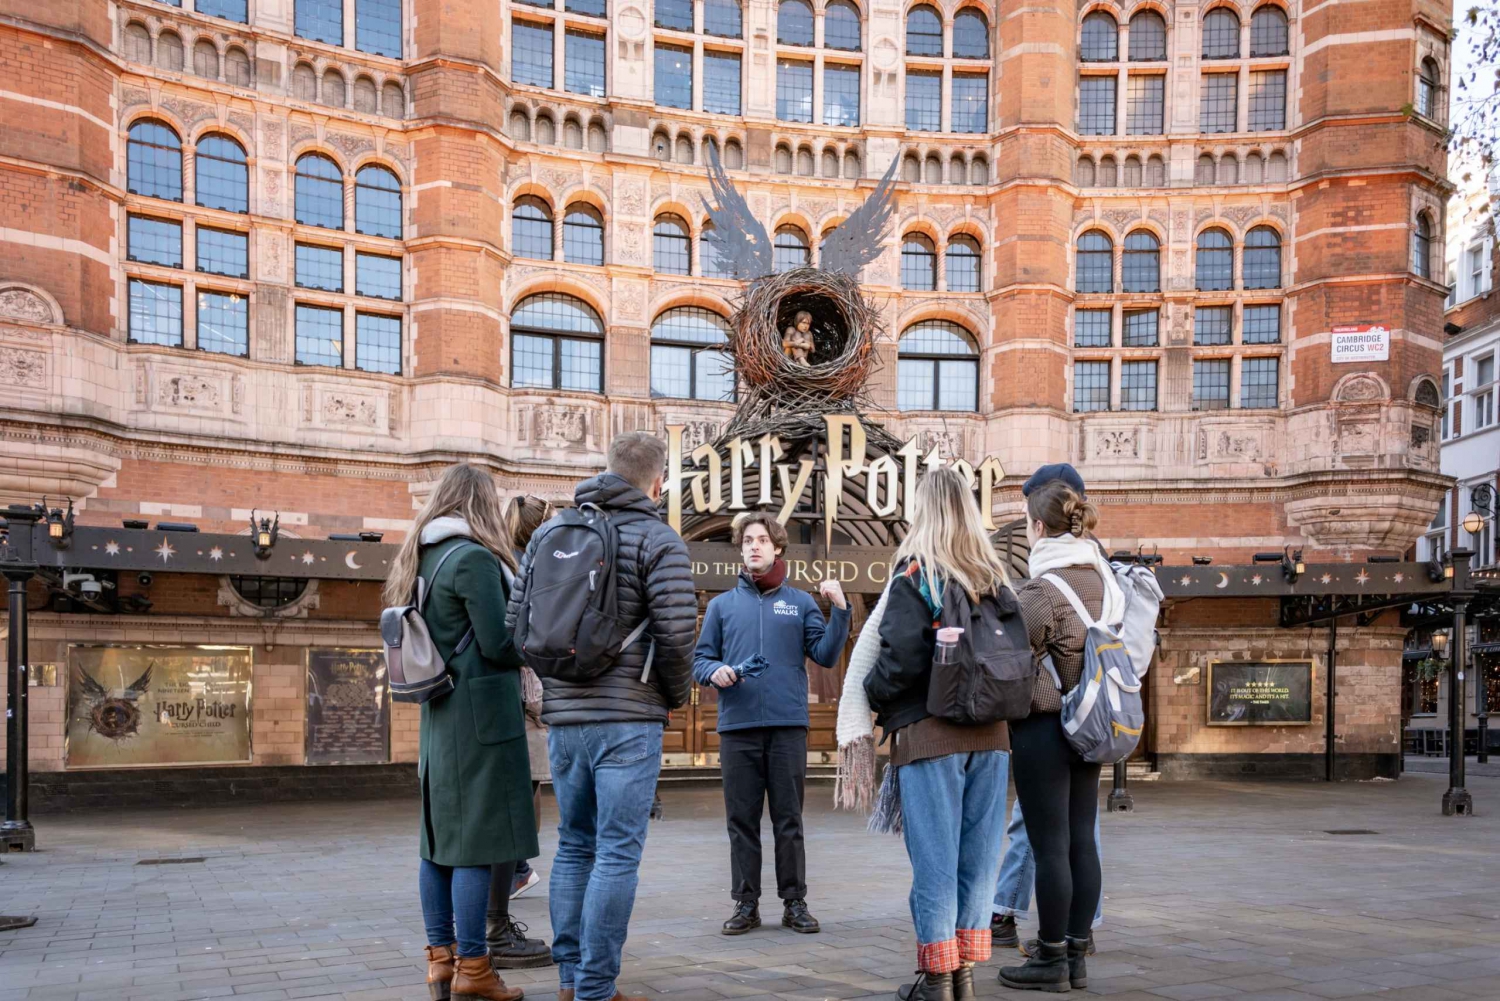 London: Harry Potter Movie Locations Magic Guided Tour